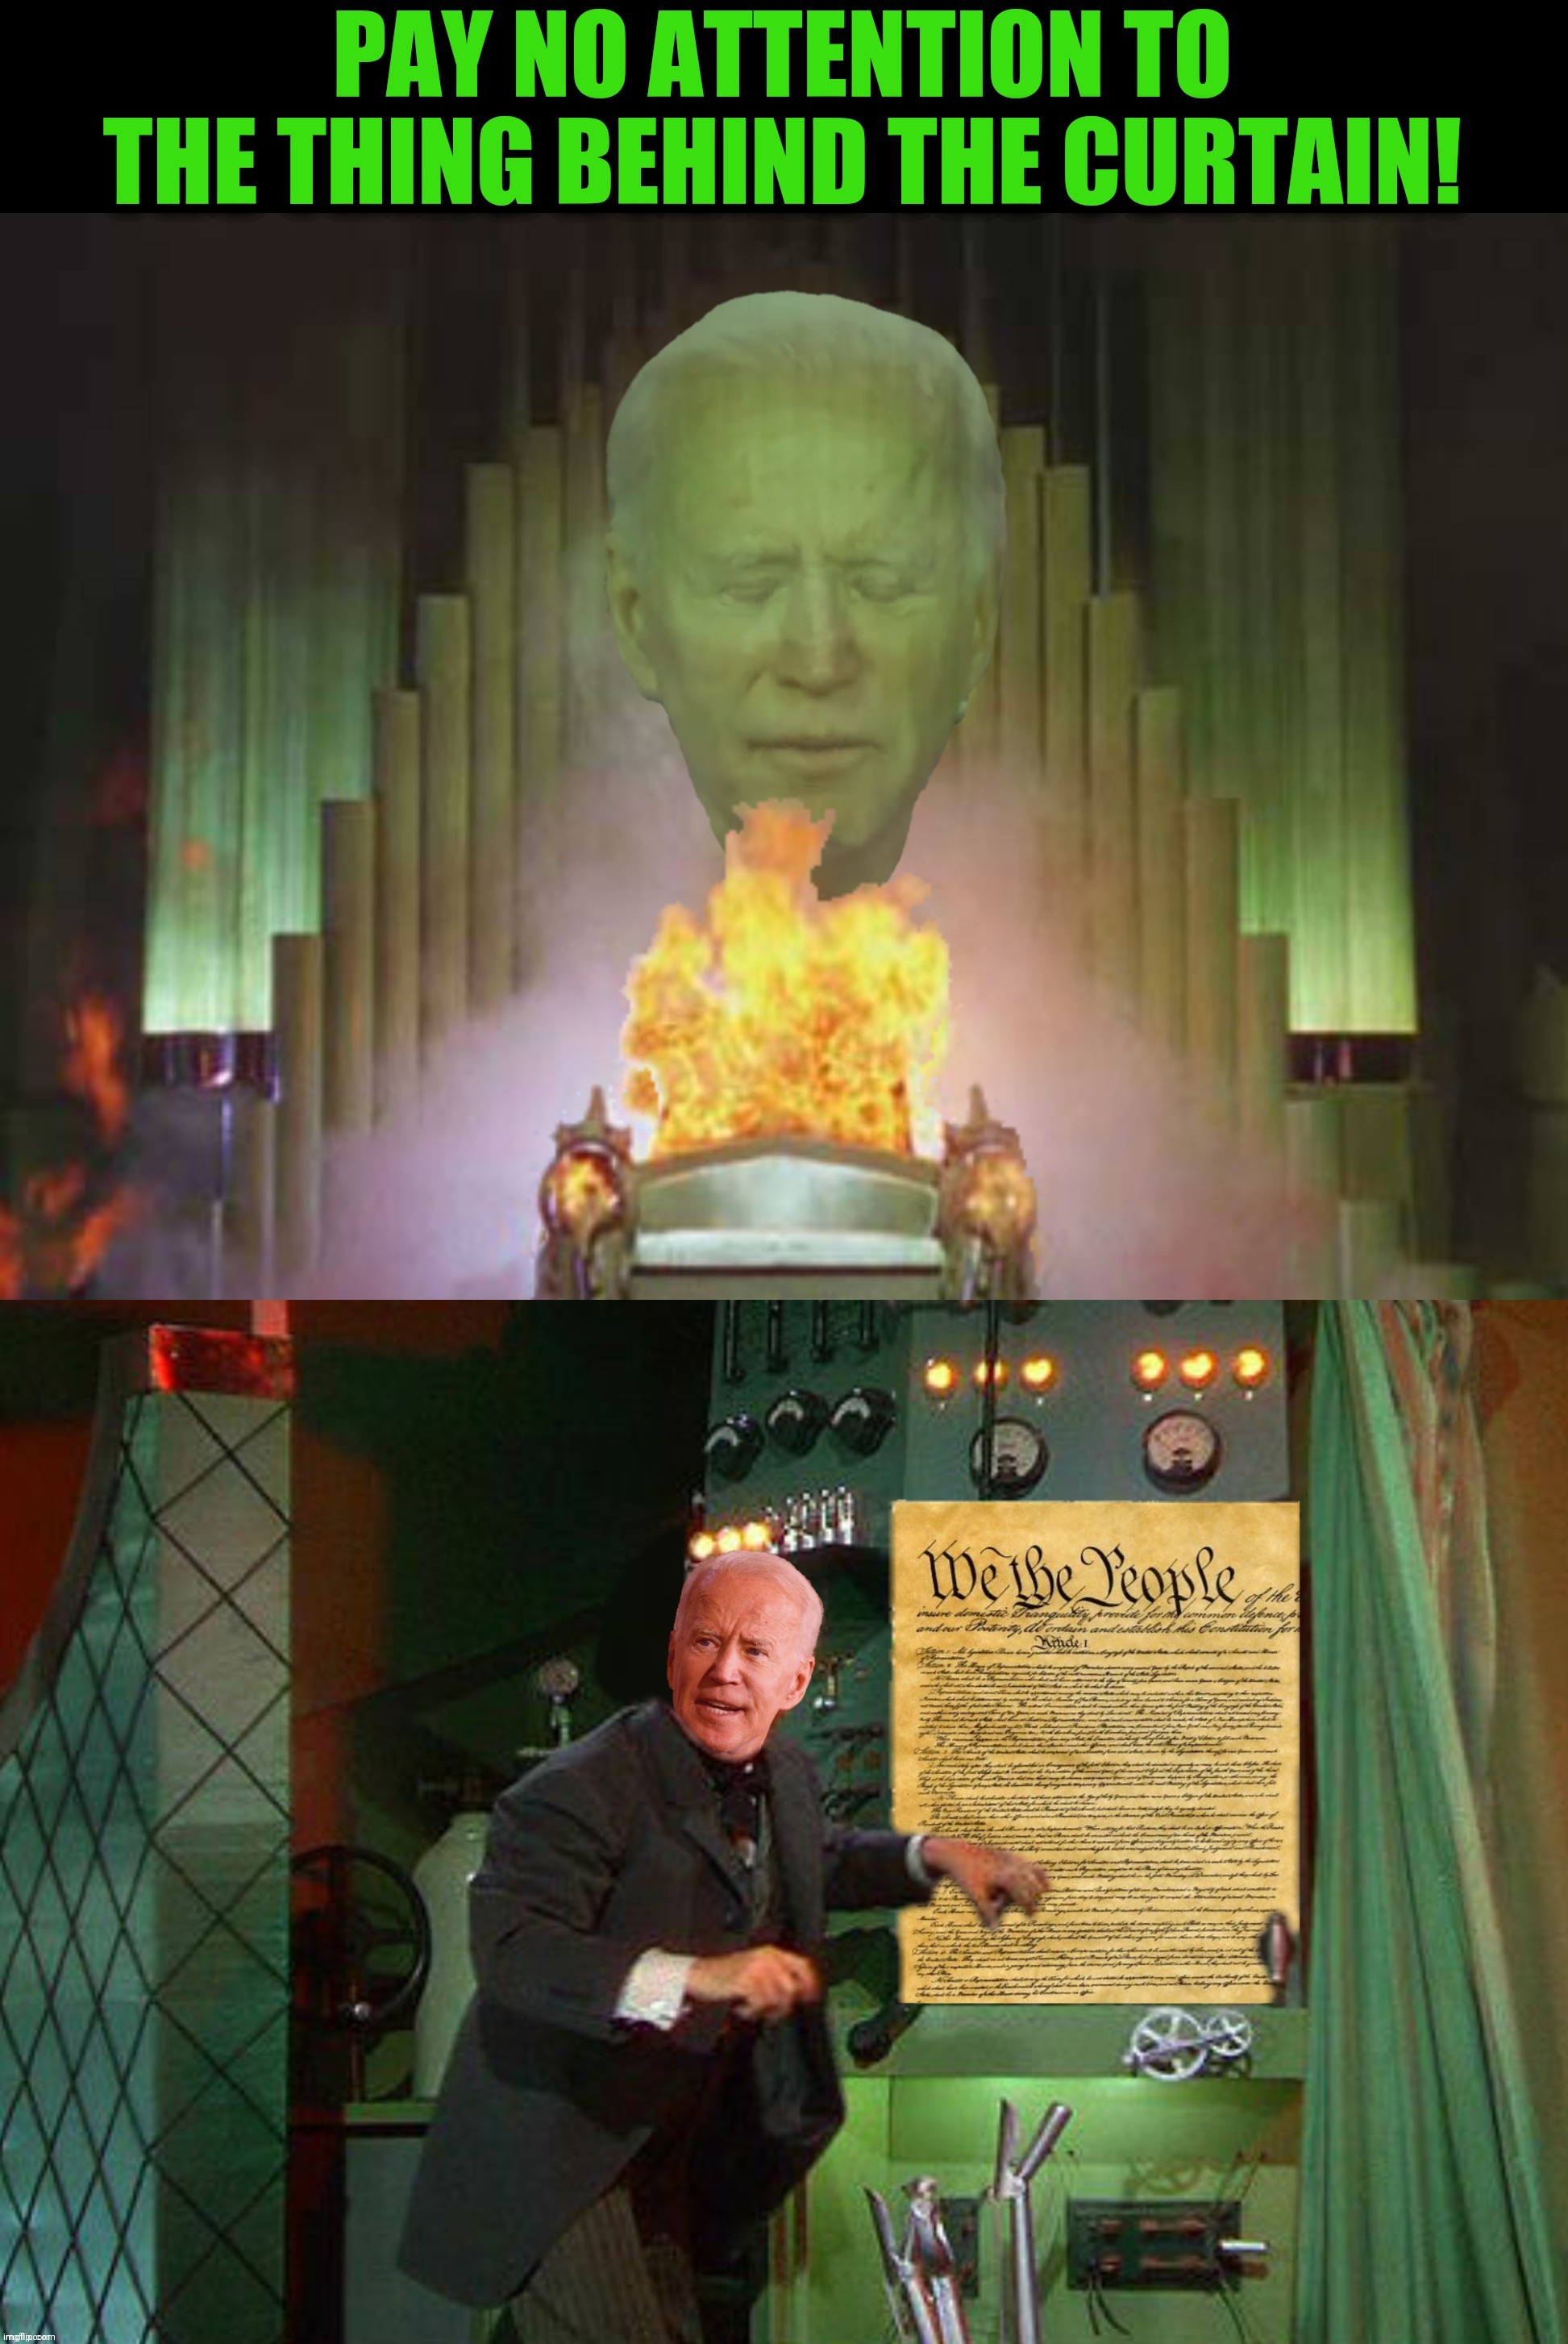 Apparently The Supreme Court looked behind the curtain | image tagged in bad photoshop,joe biden,constitution,the wizard of oz | made w/ Imgflip meme maker